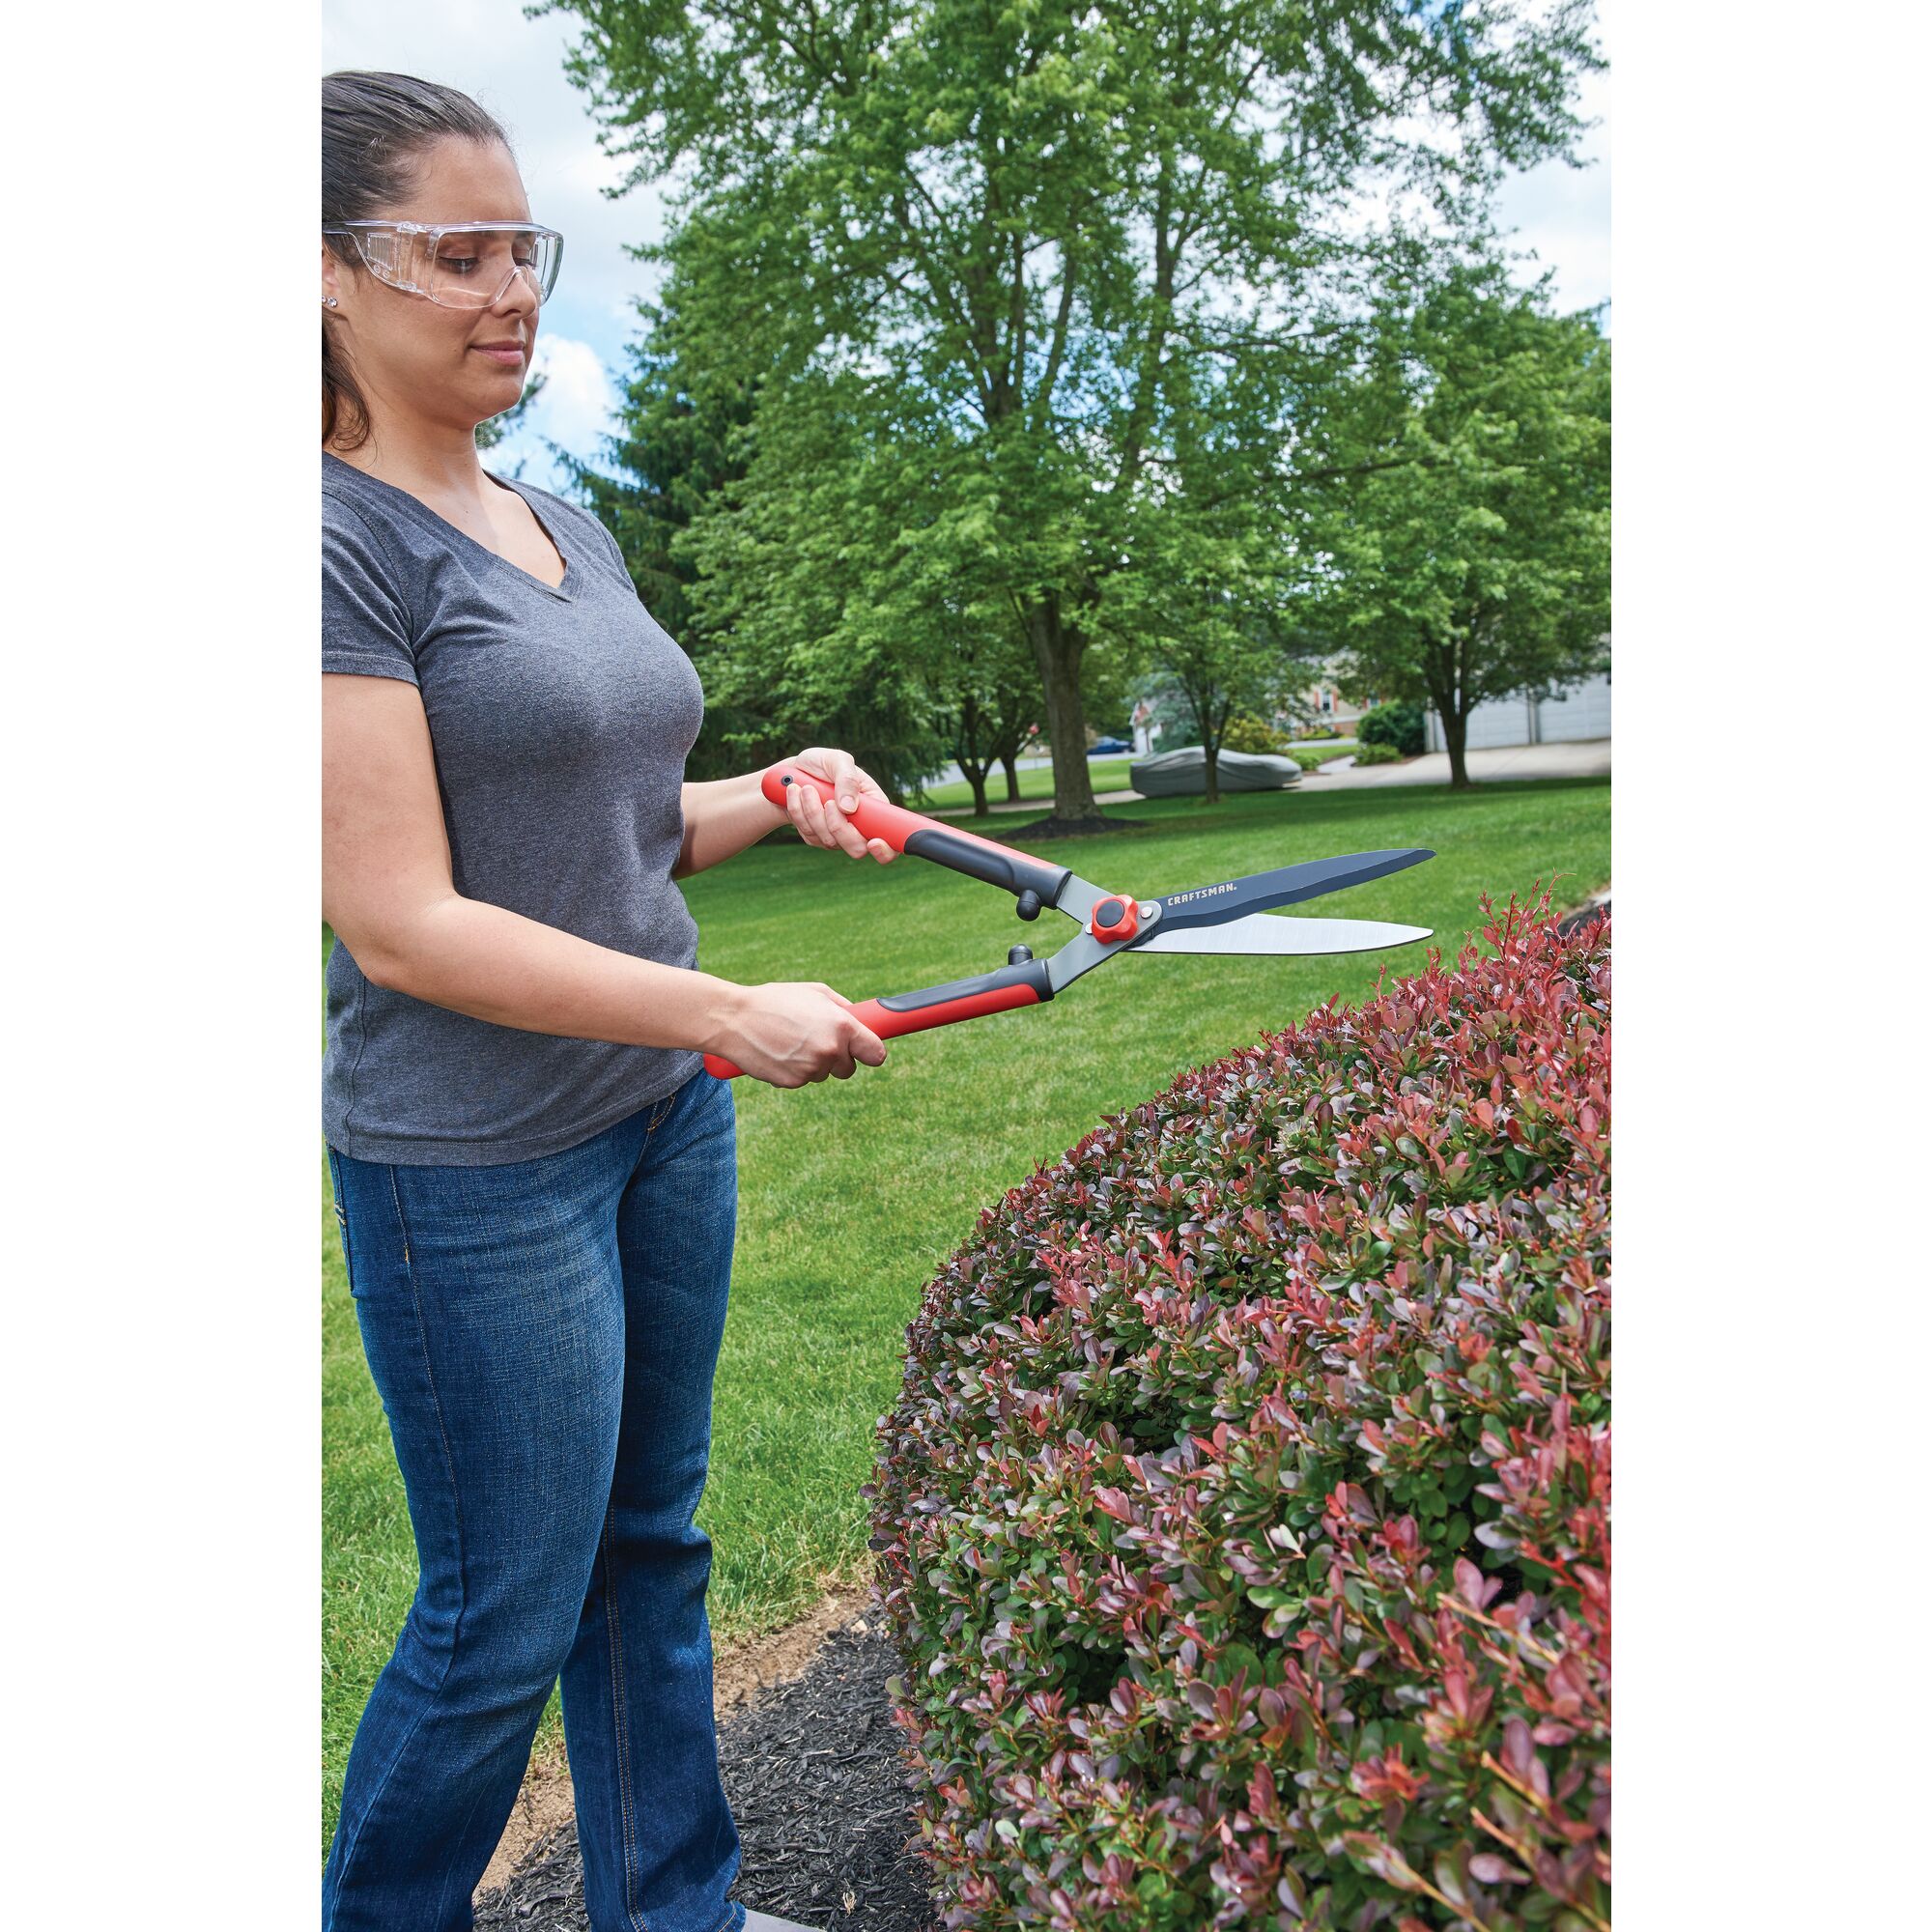 Hedge shears being used by a person outdoors.